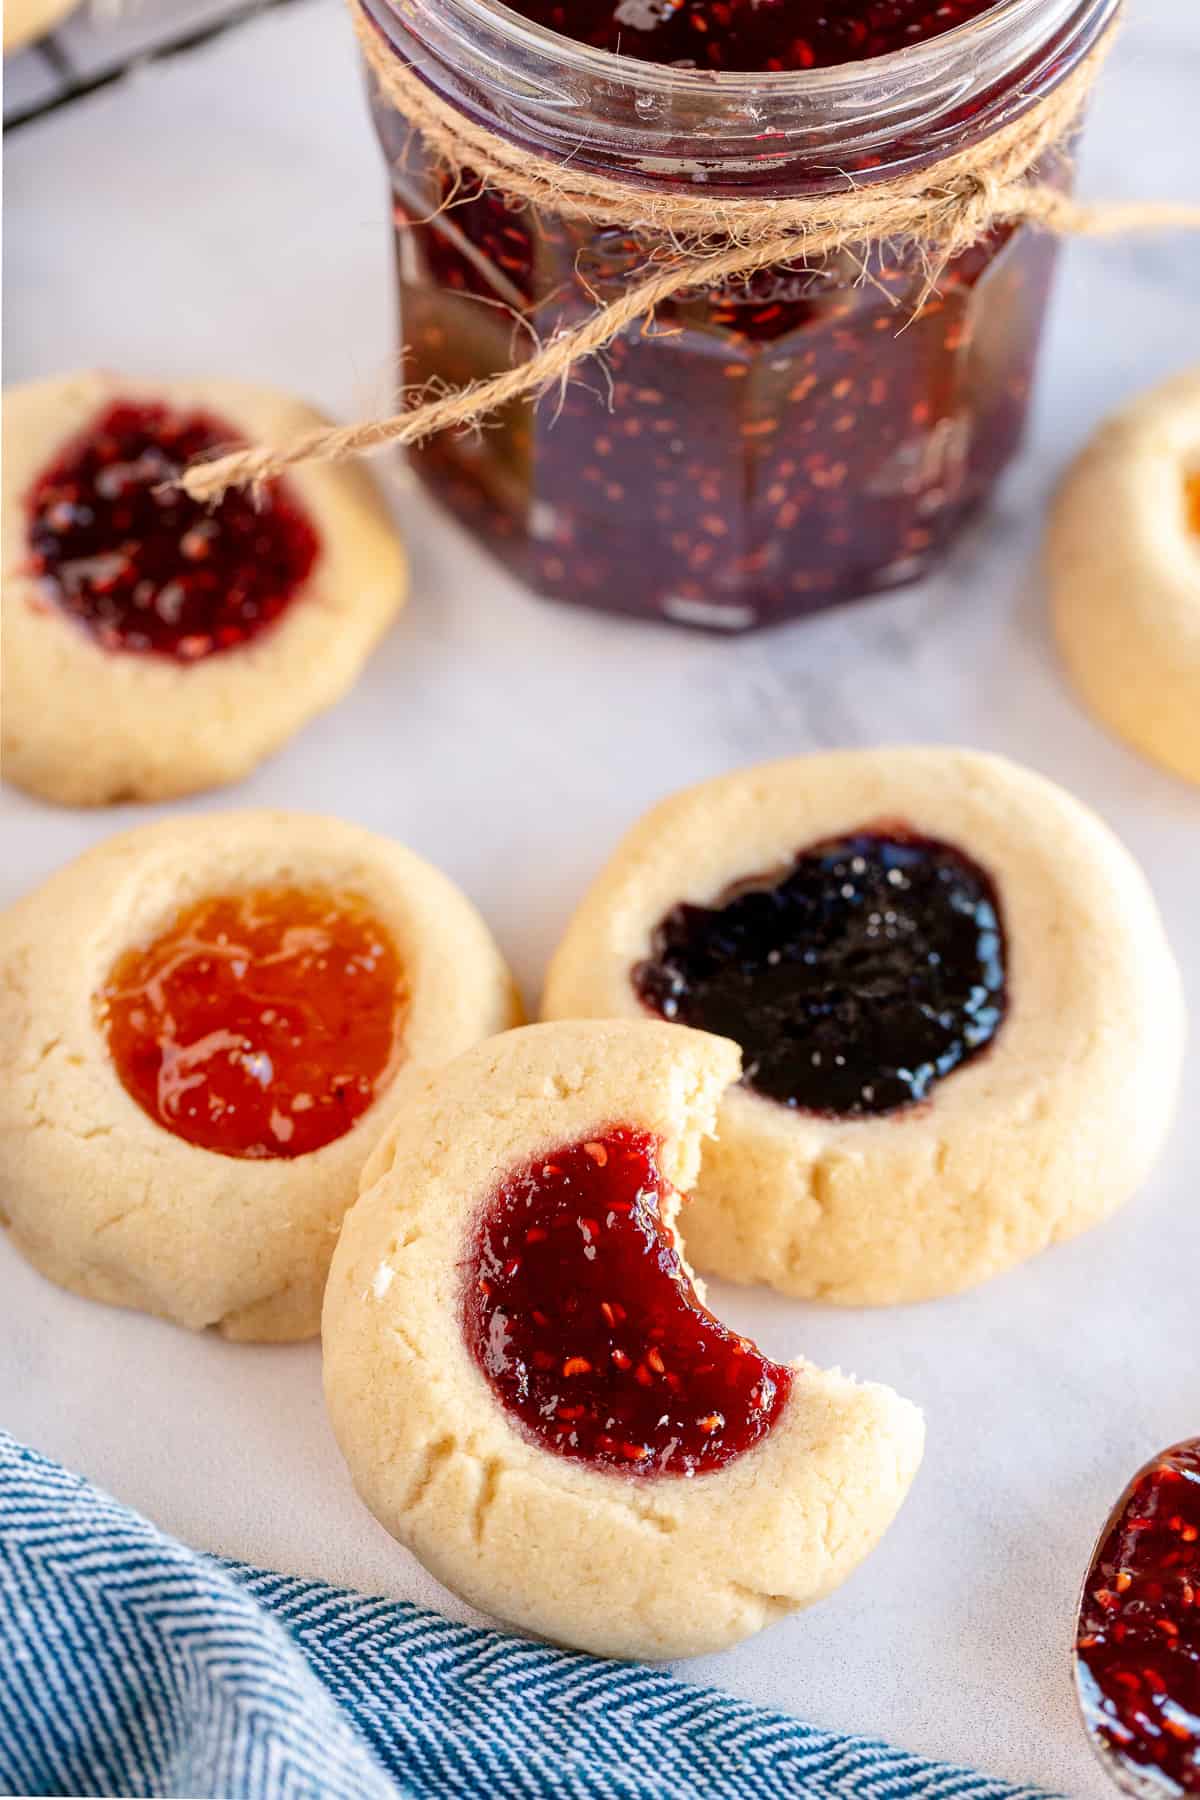 Four Jam Thumbprint Cookies and one with a bite missing.